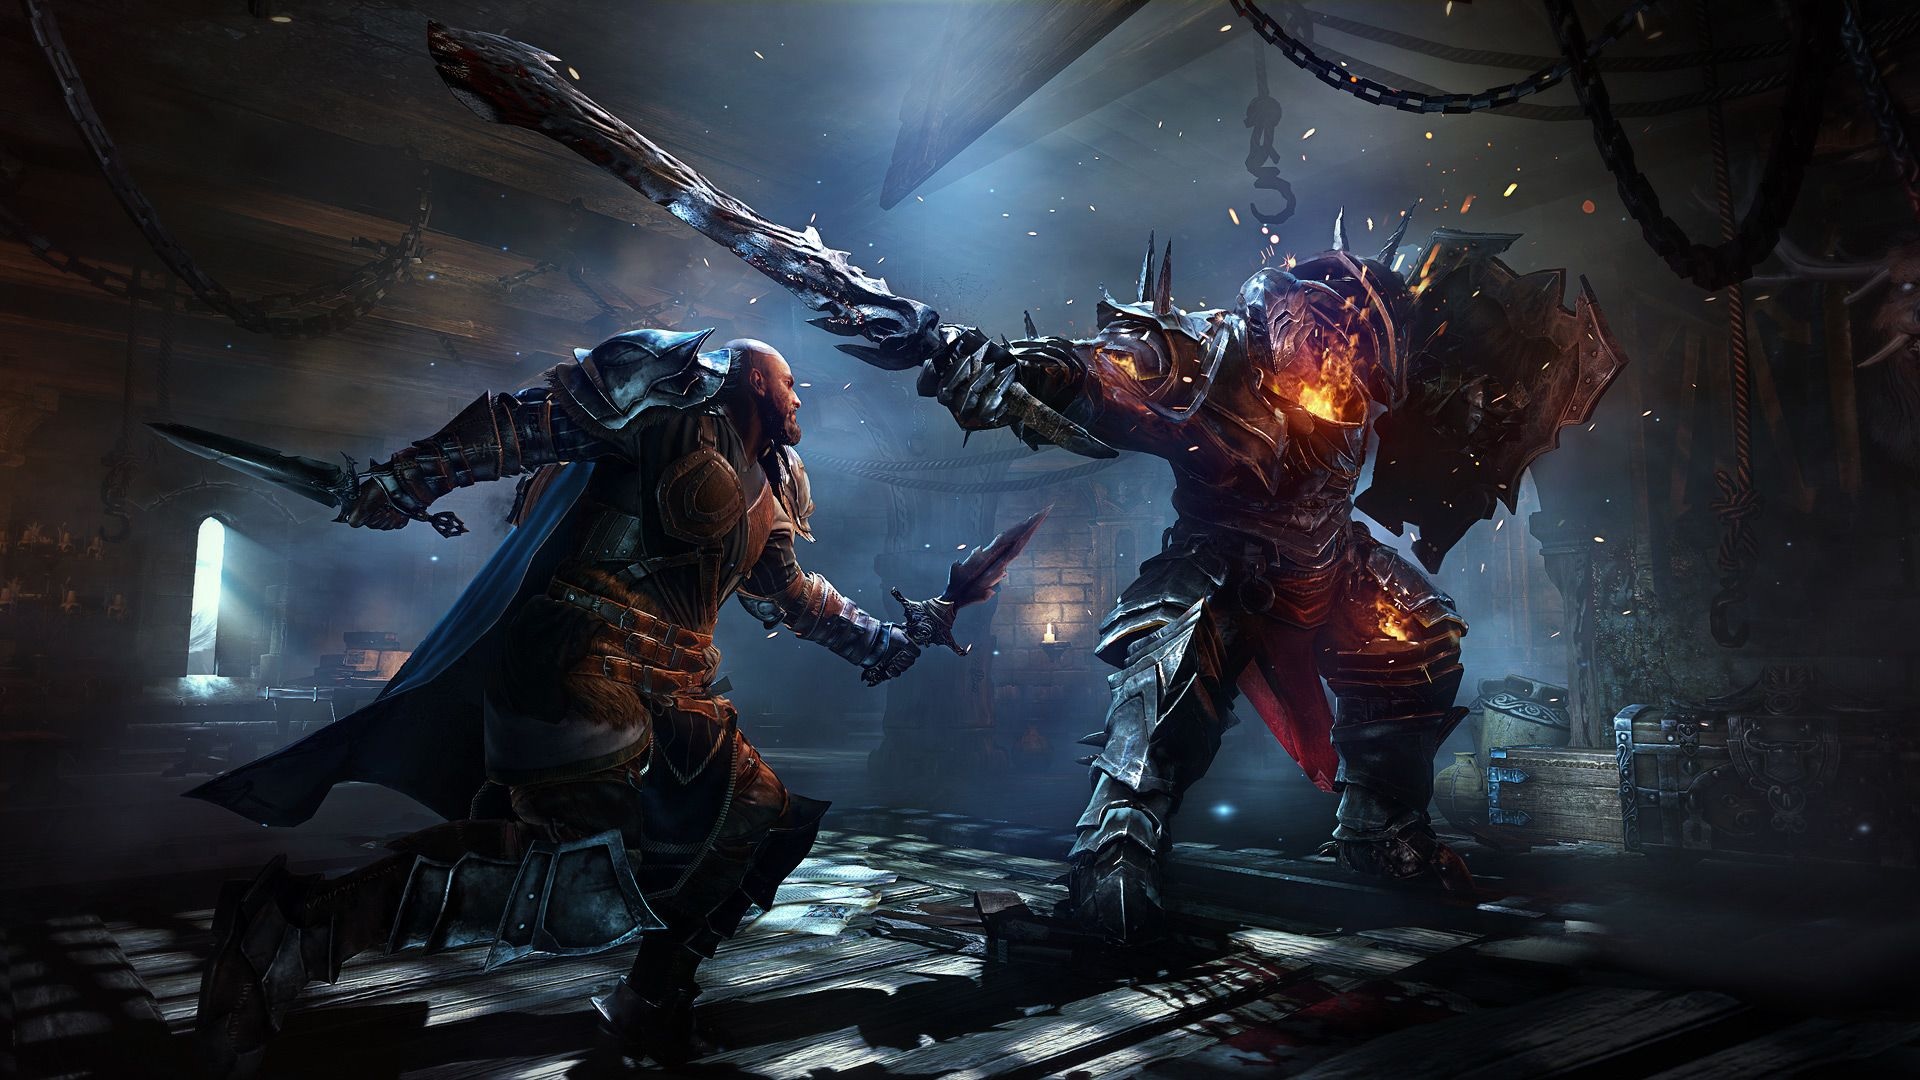 The Lords of the Fallen piqued